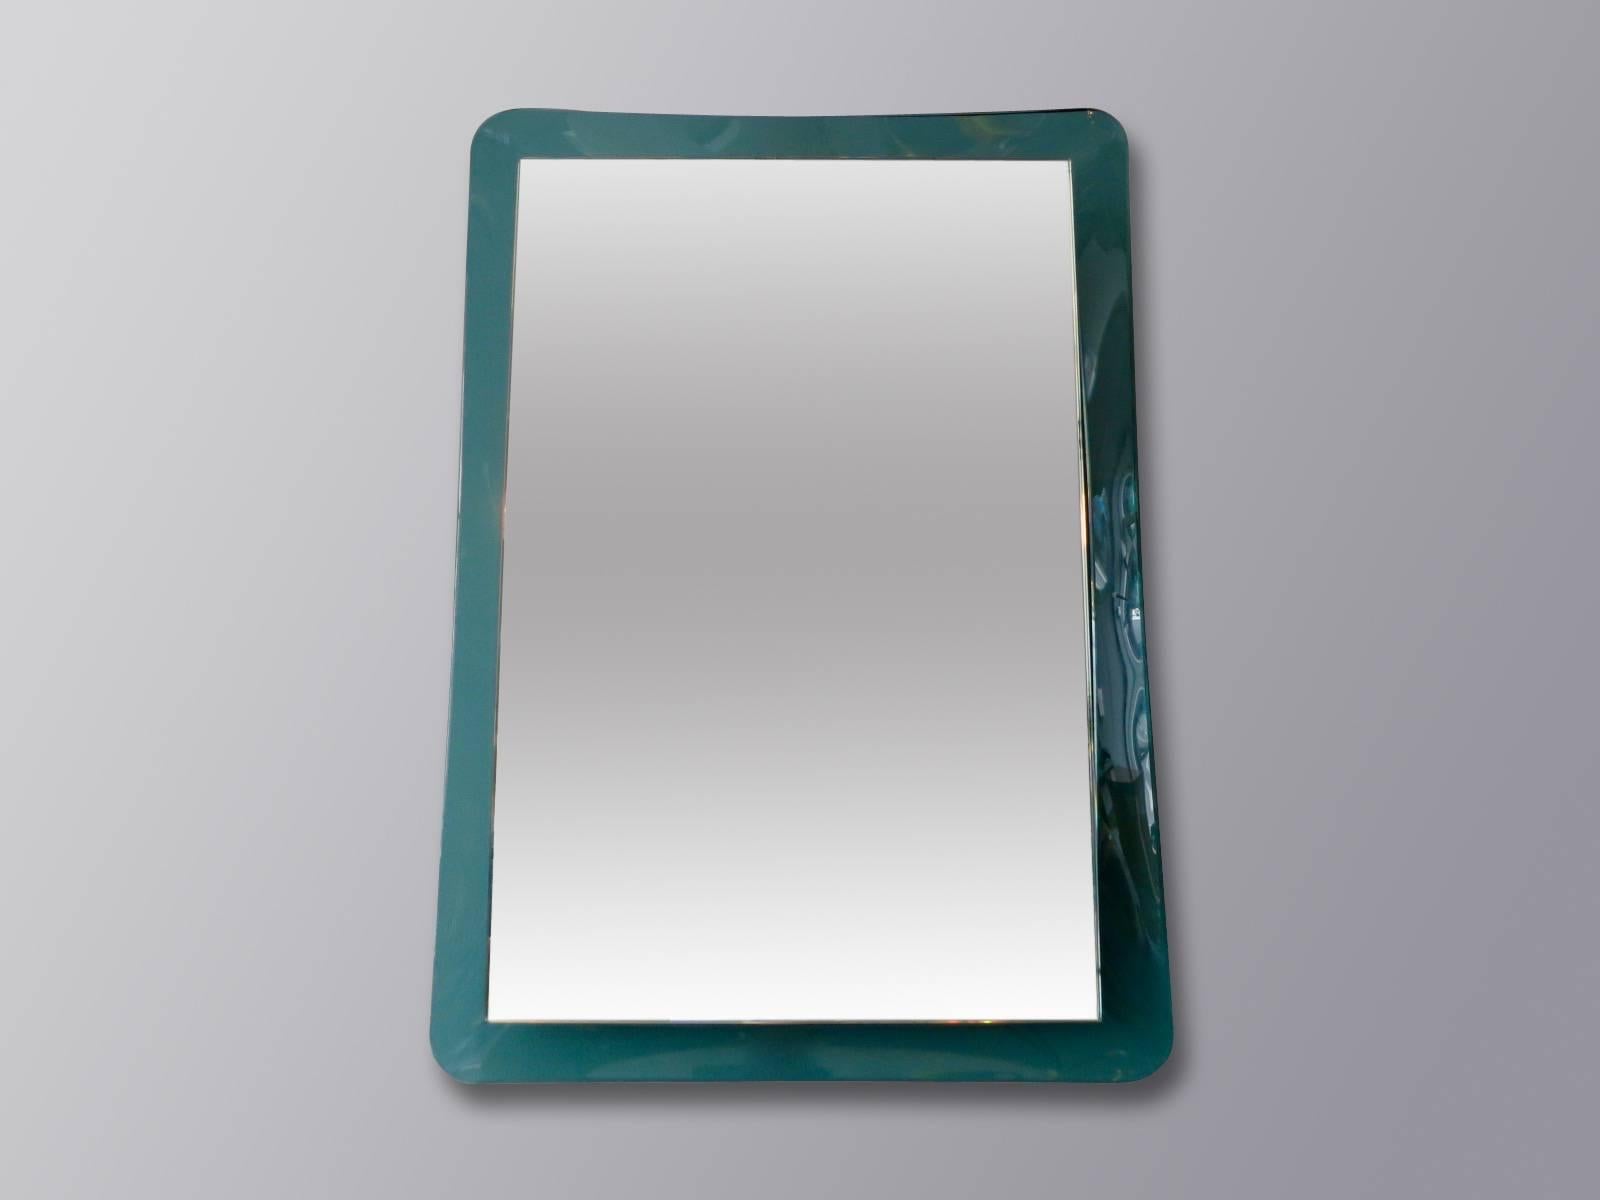 A rectangle mirror sitting in a thick aquamarine concave piece of glass. With chrome fittings. Very good quality and original mirror.